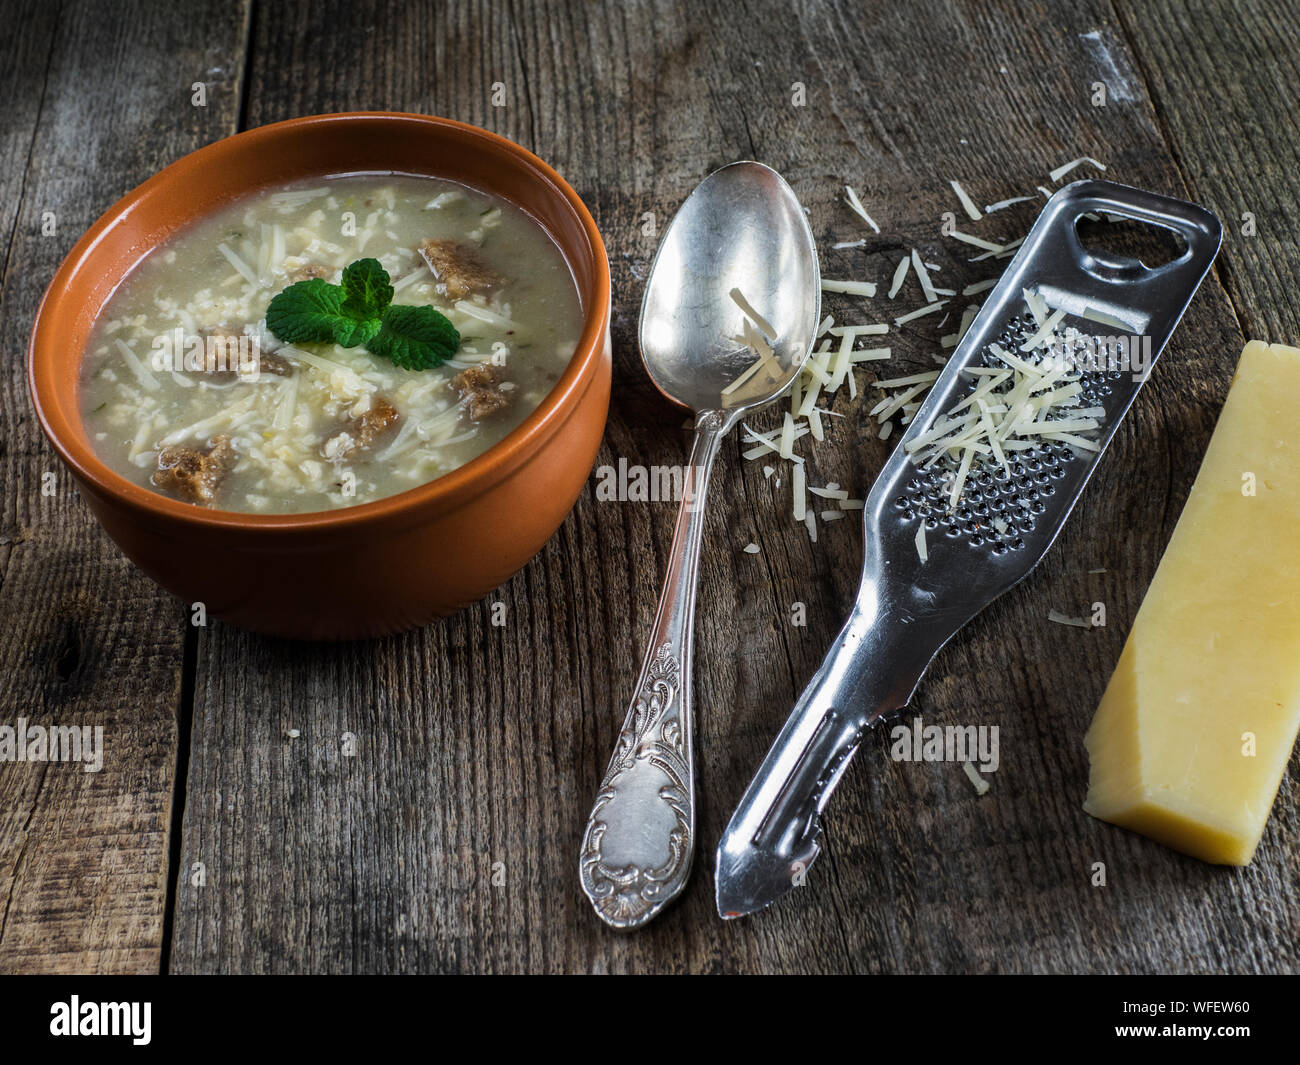 Close-up Of Vegetable Soup With Croutons And Grated Cheese On Wooden Table Stock Photo